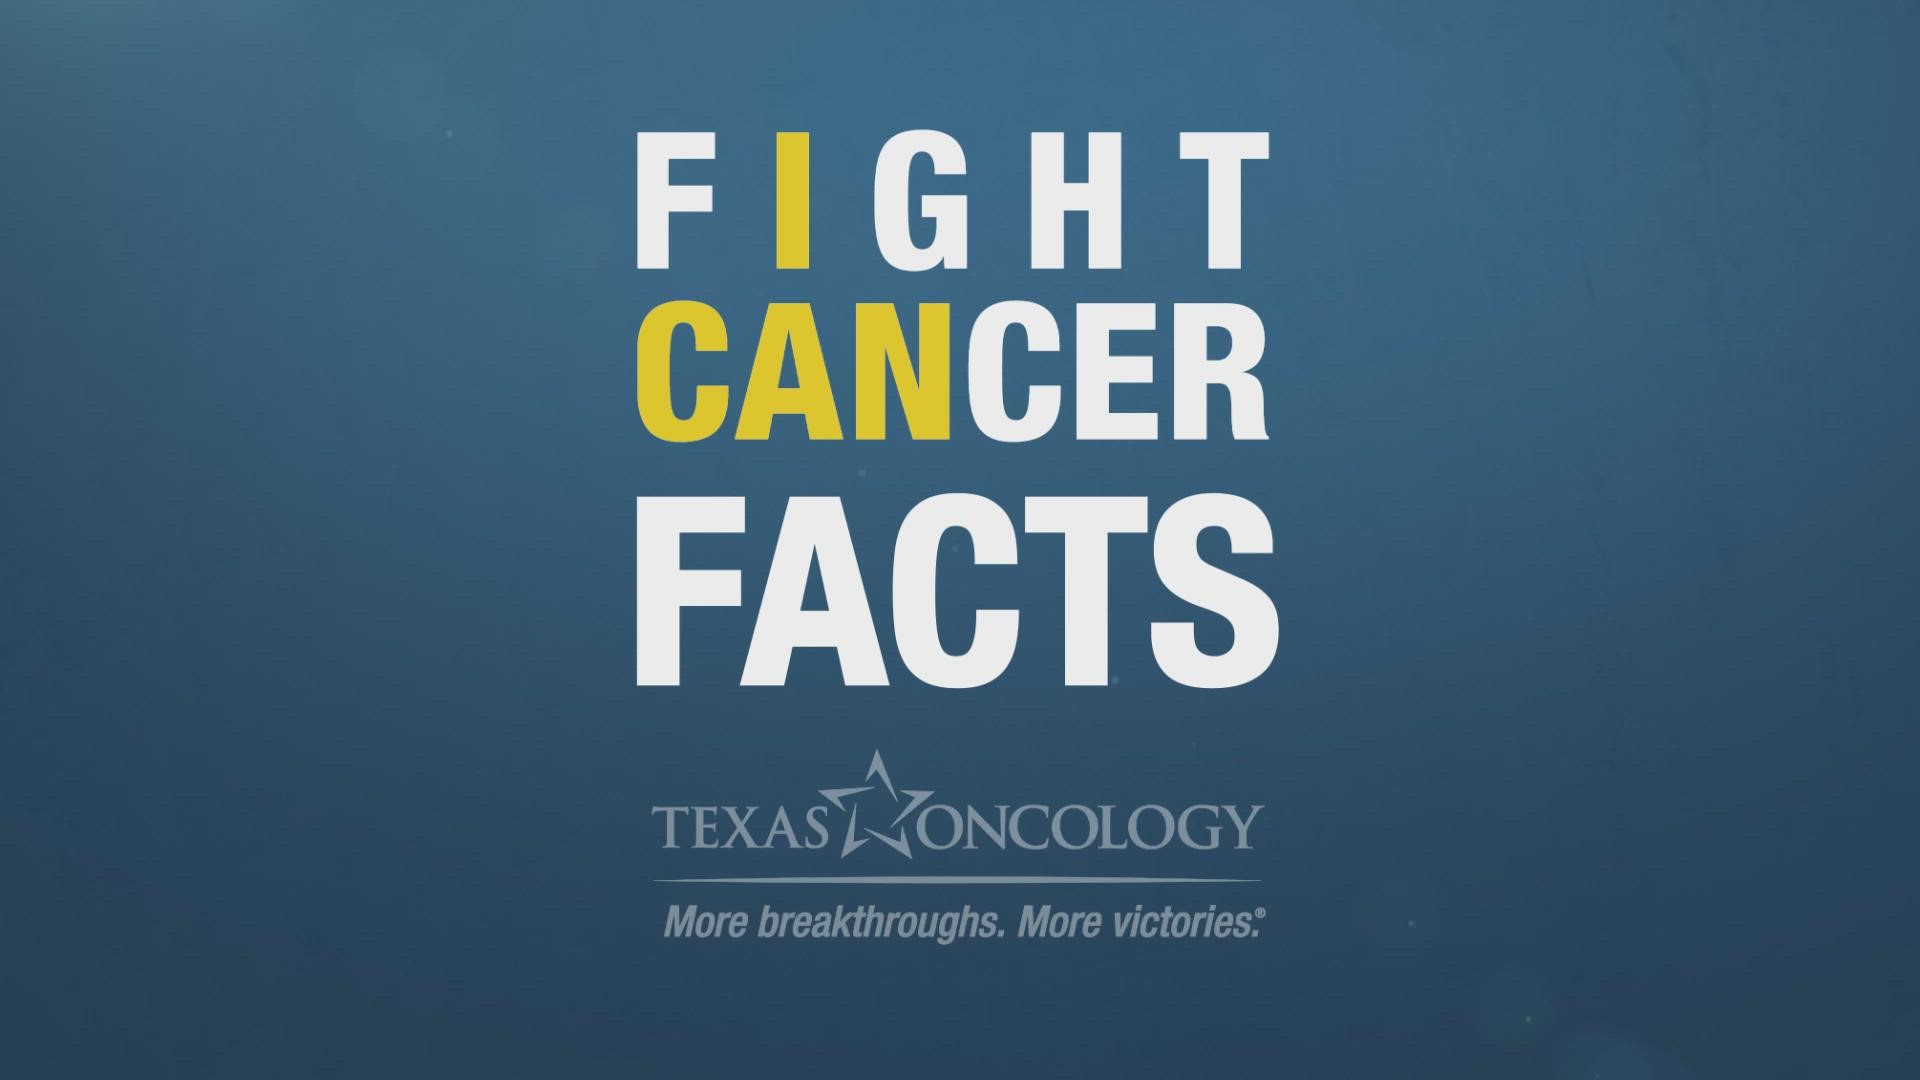 Local Texas Oncology doctor outlines how immunotherapy is an advanced form of targeted cancer therapy that boosts your body’s immune system.